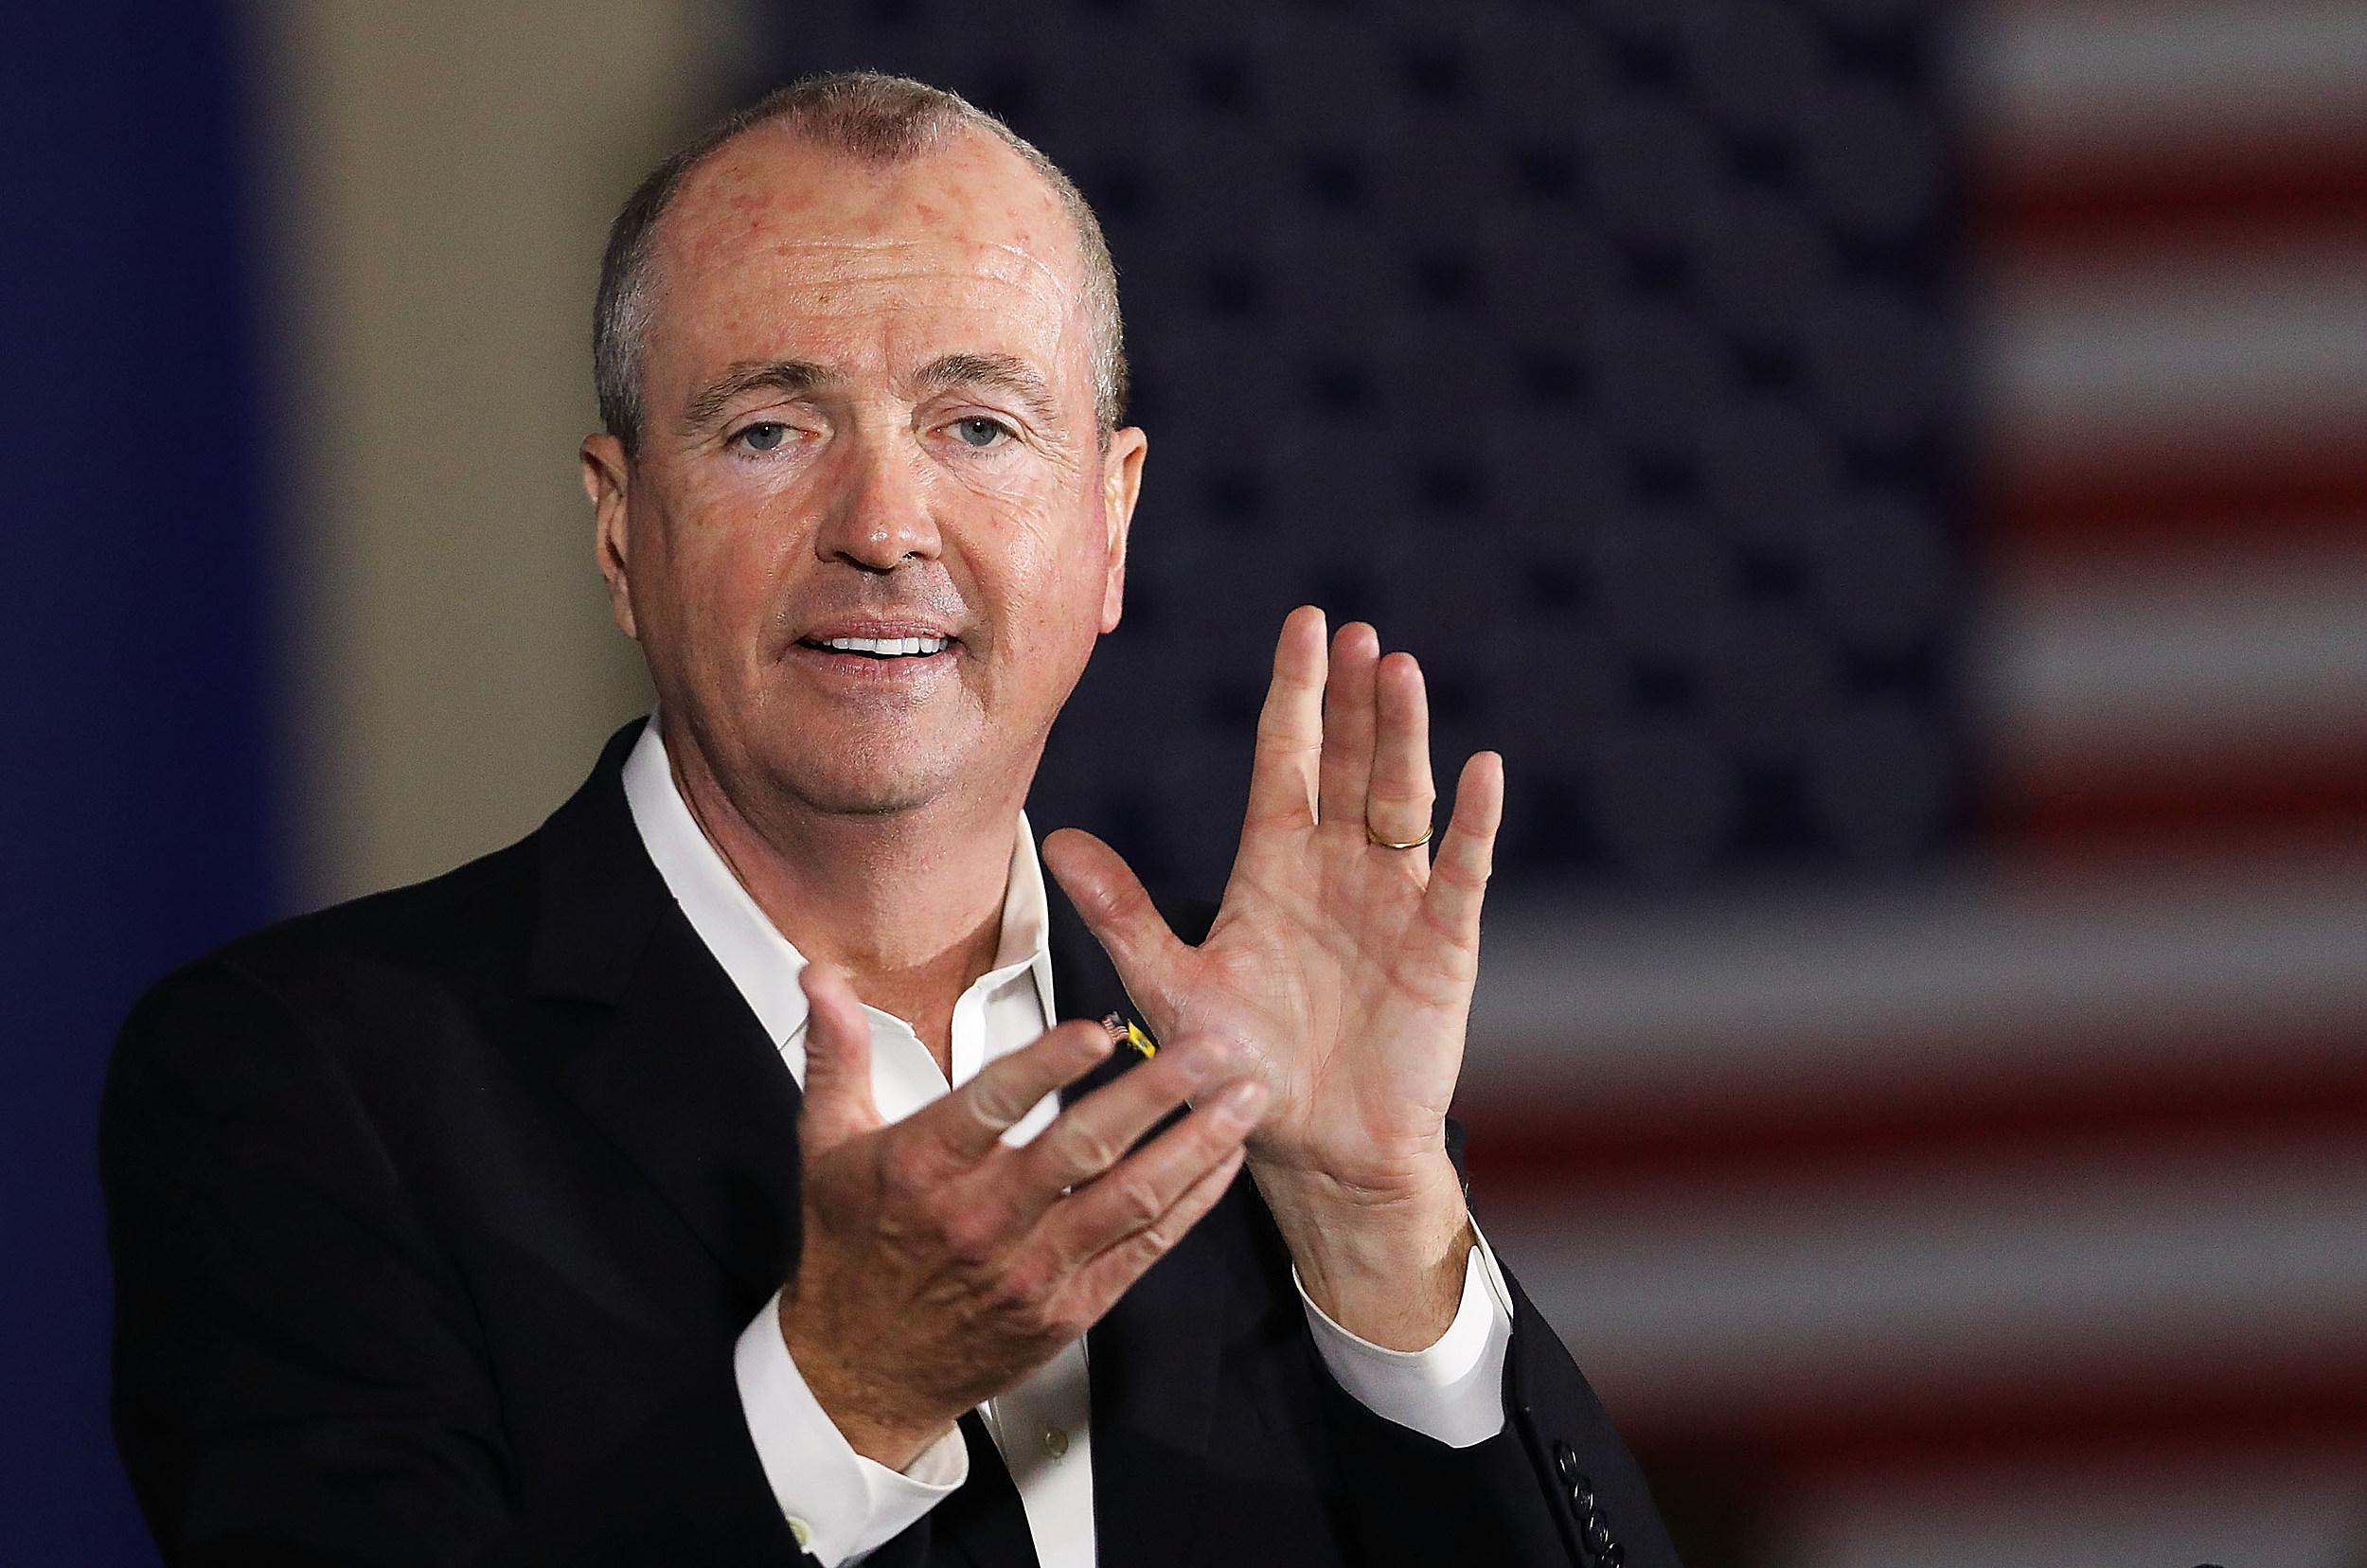 governor-murphy-says-2020-trick-or-treating-not-cancelled-in-nj